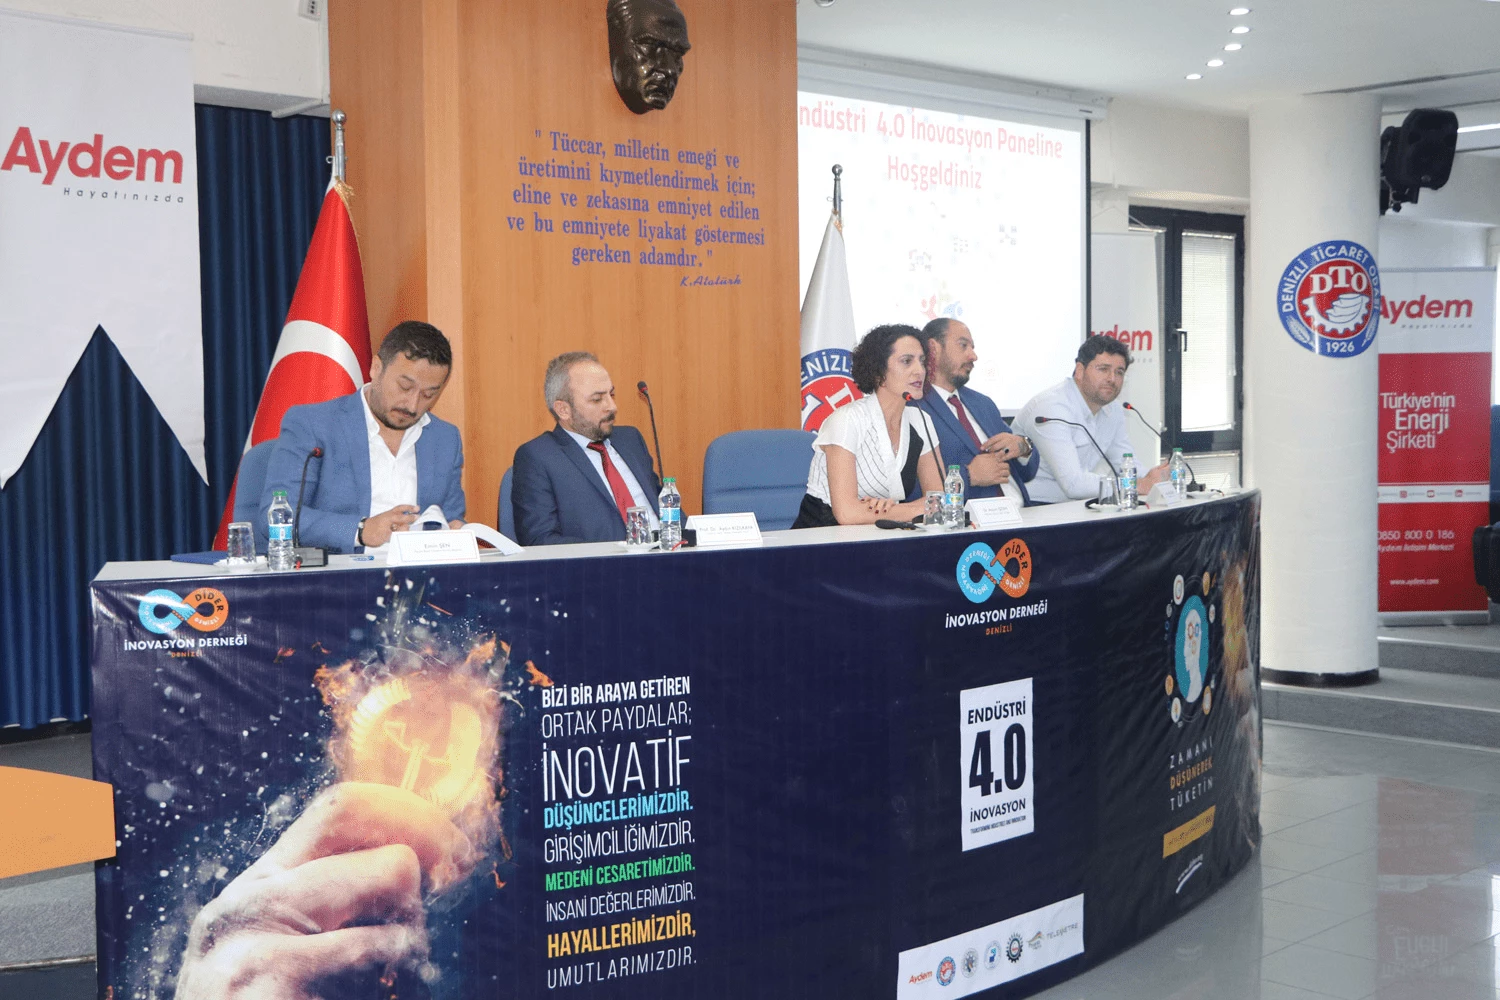  Aydem Attends the “Industry 4.0 and Innovation” Panel together with Alatay Elektromobil 